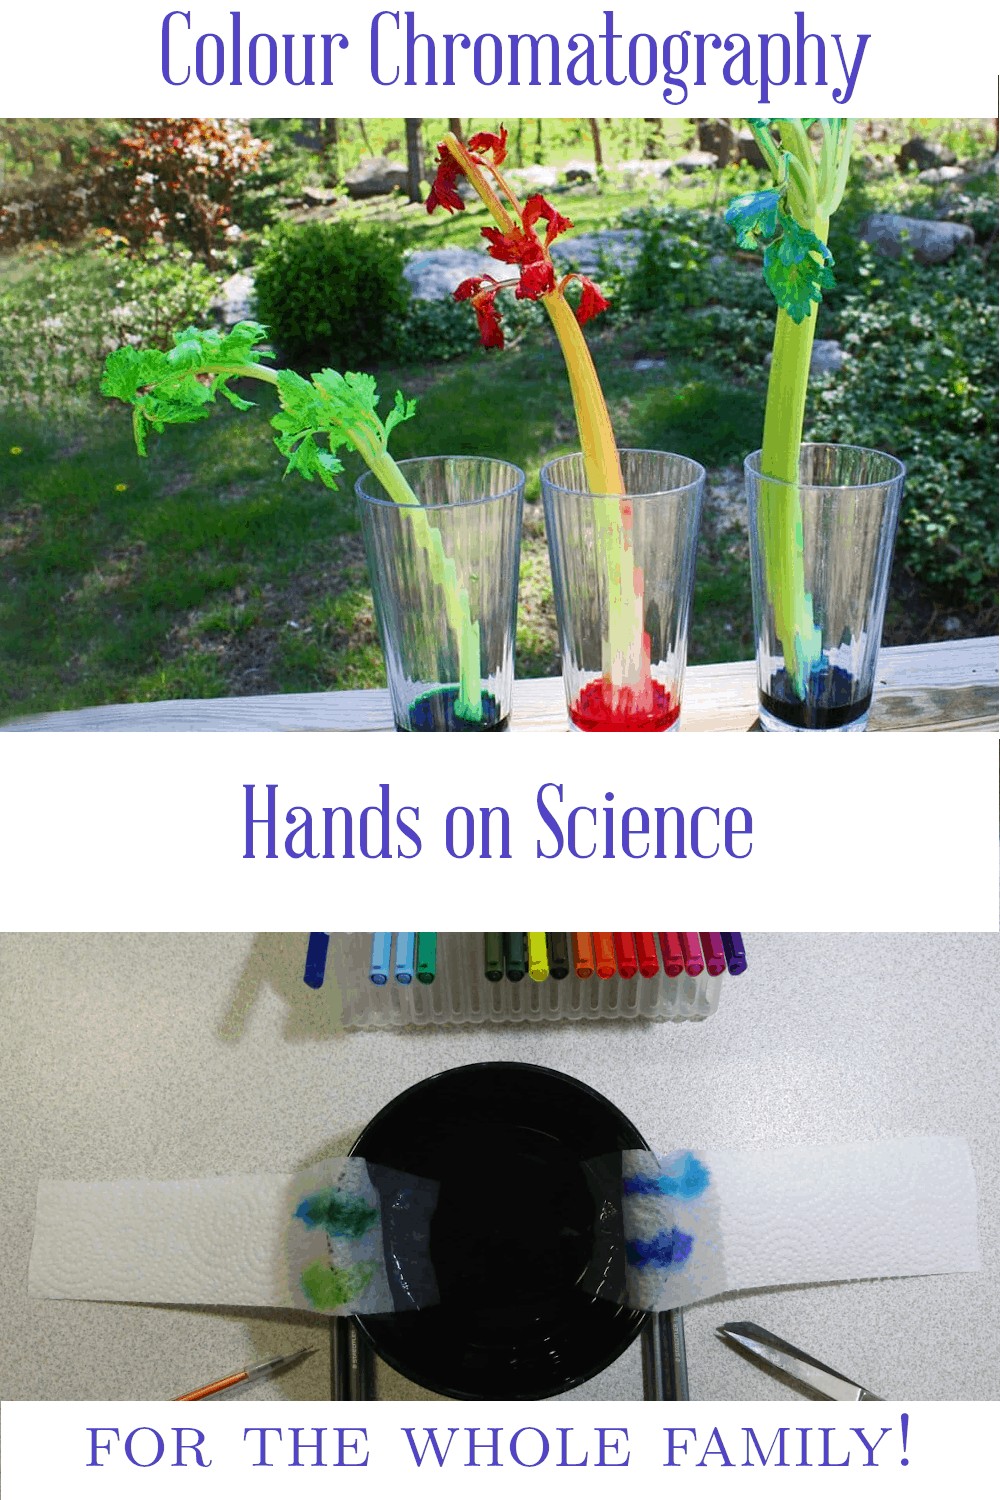 how colour chromatography works